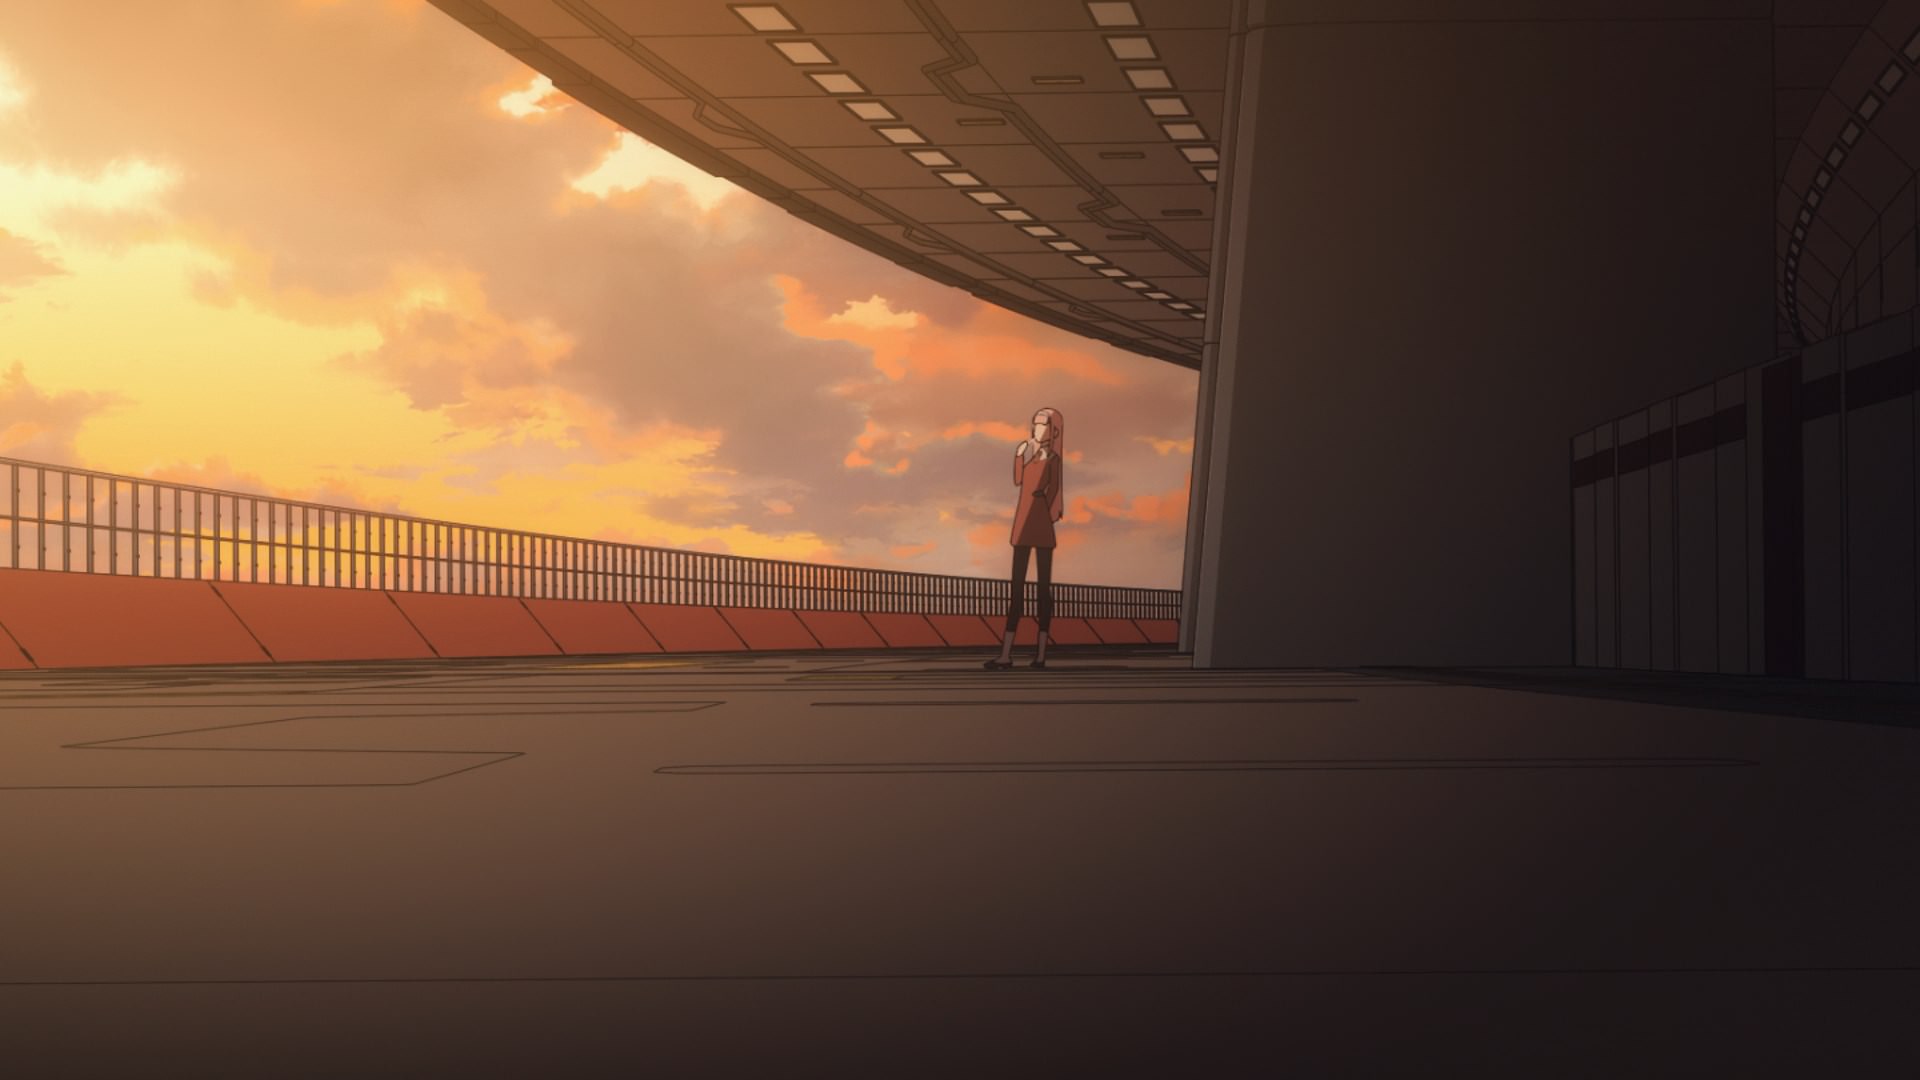 Darling in the FranXX Episode #02  The Anime Rambler - By Benigmatica